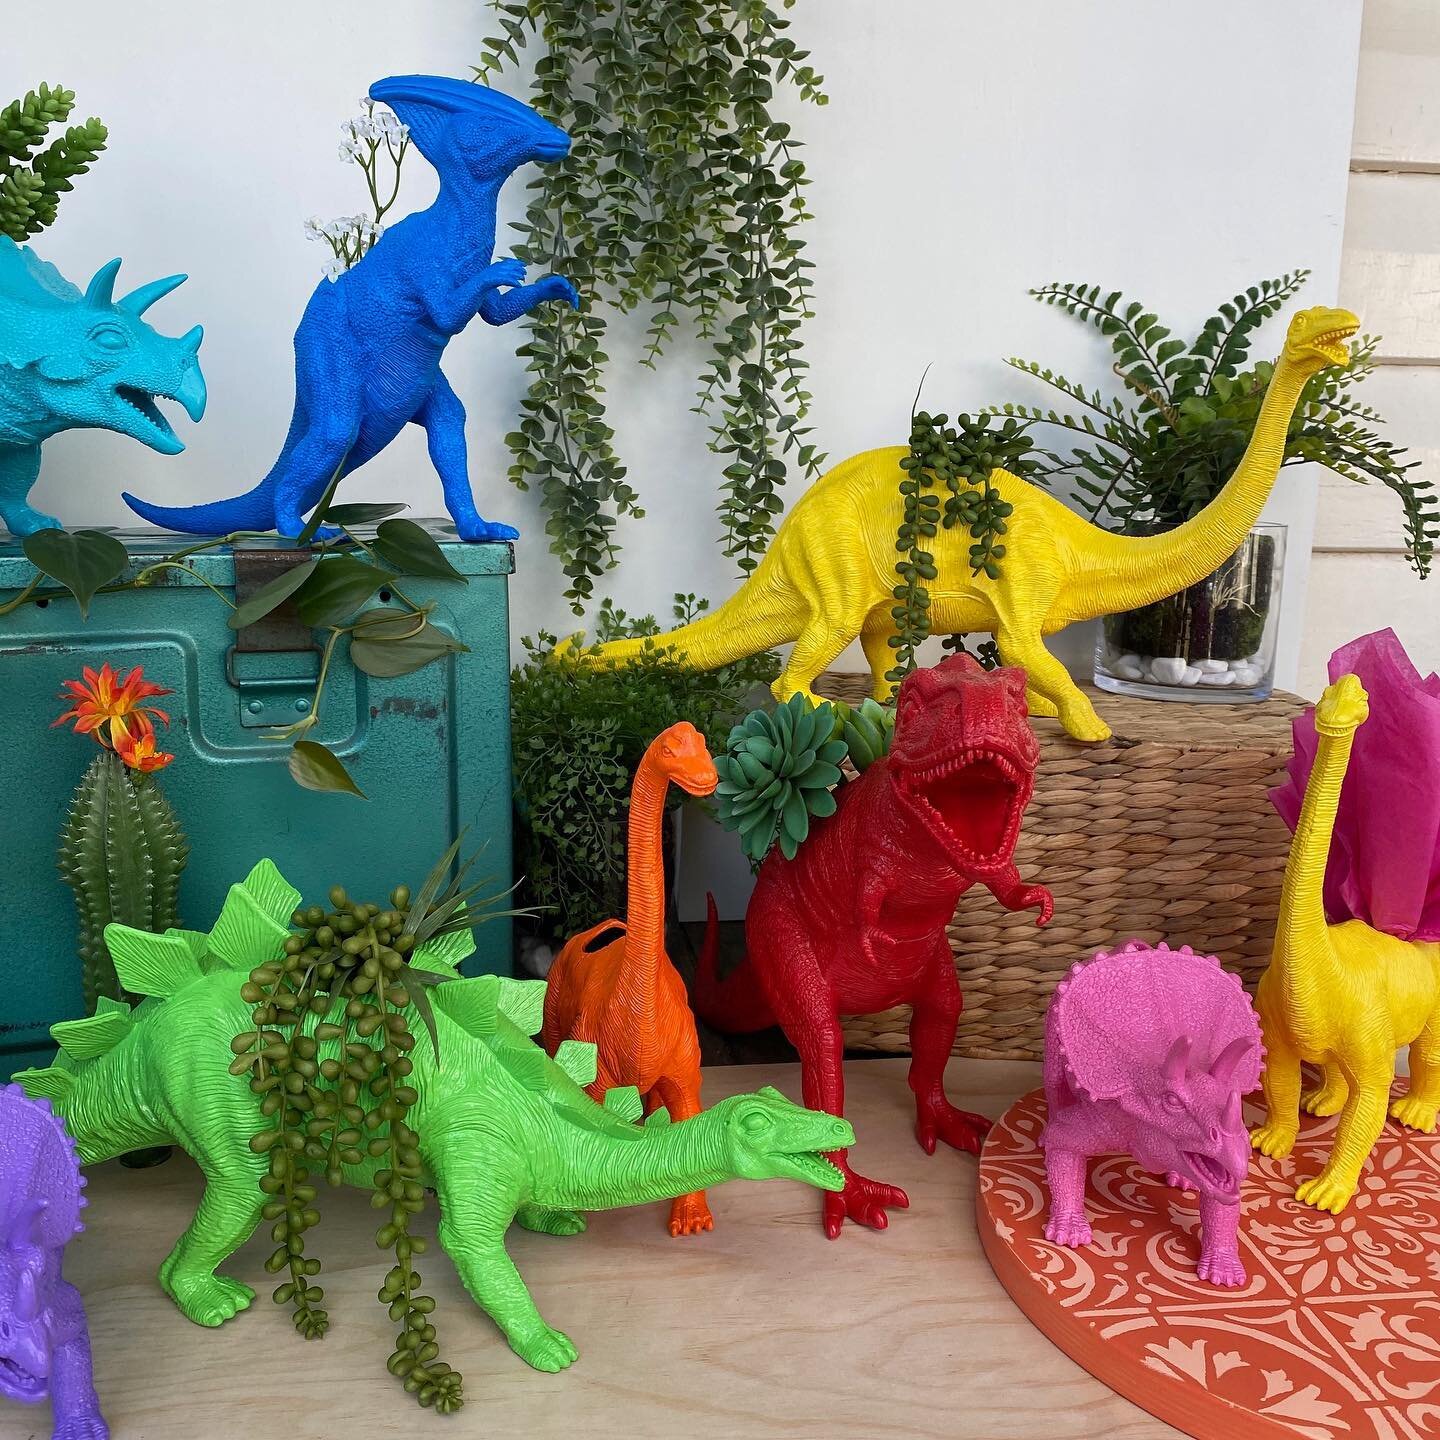 There&rsquo;s been a RESTOCK online! 🦕🦖 (link in bio)

Who would have thought the humble dinosaur could be such a fun and quirky accessory in your home or office! The best bit is they are an appropriate gift for all ages, yep adults love them too!
